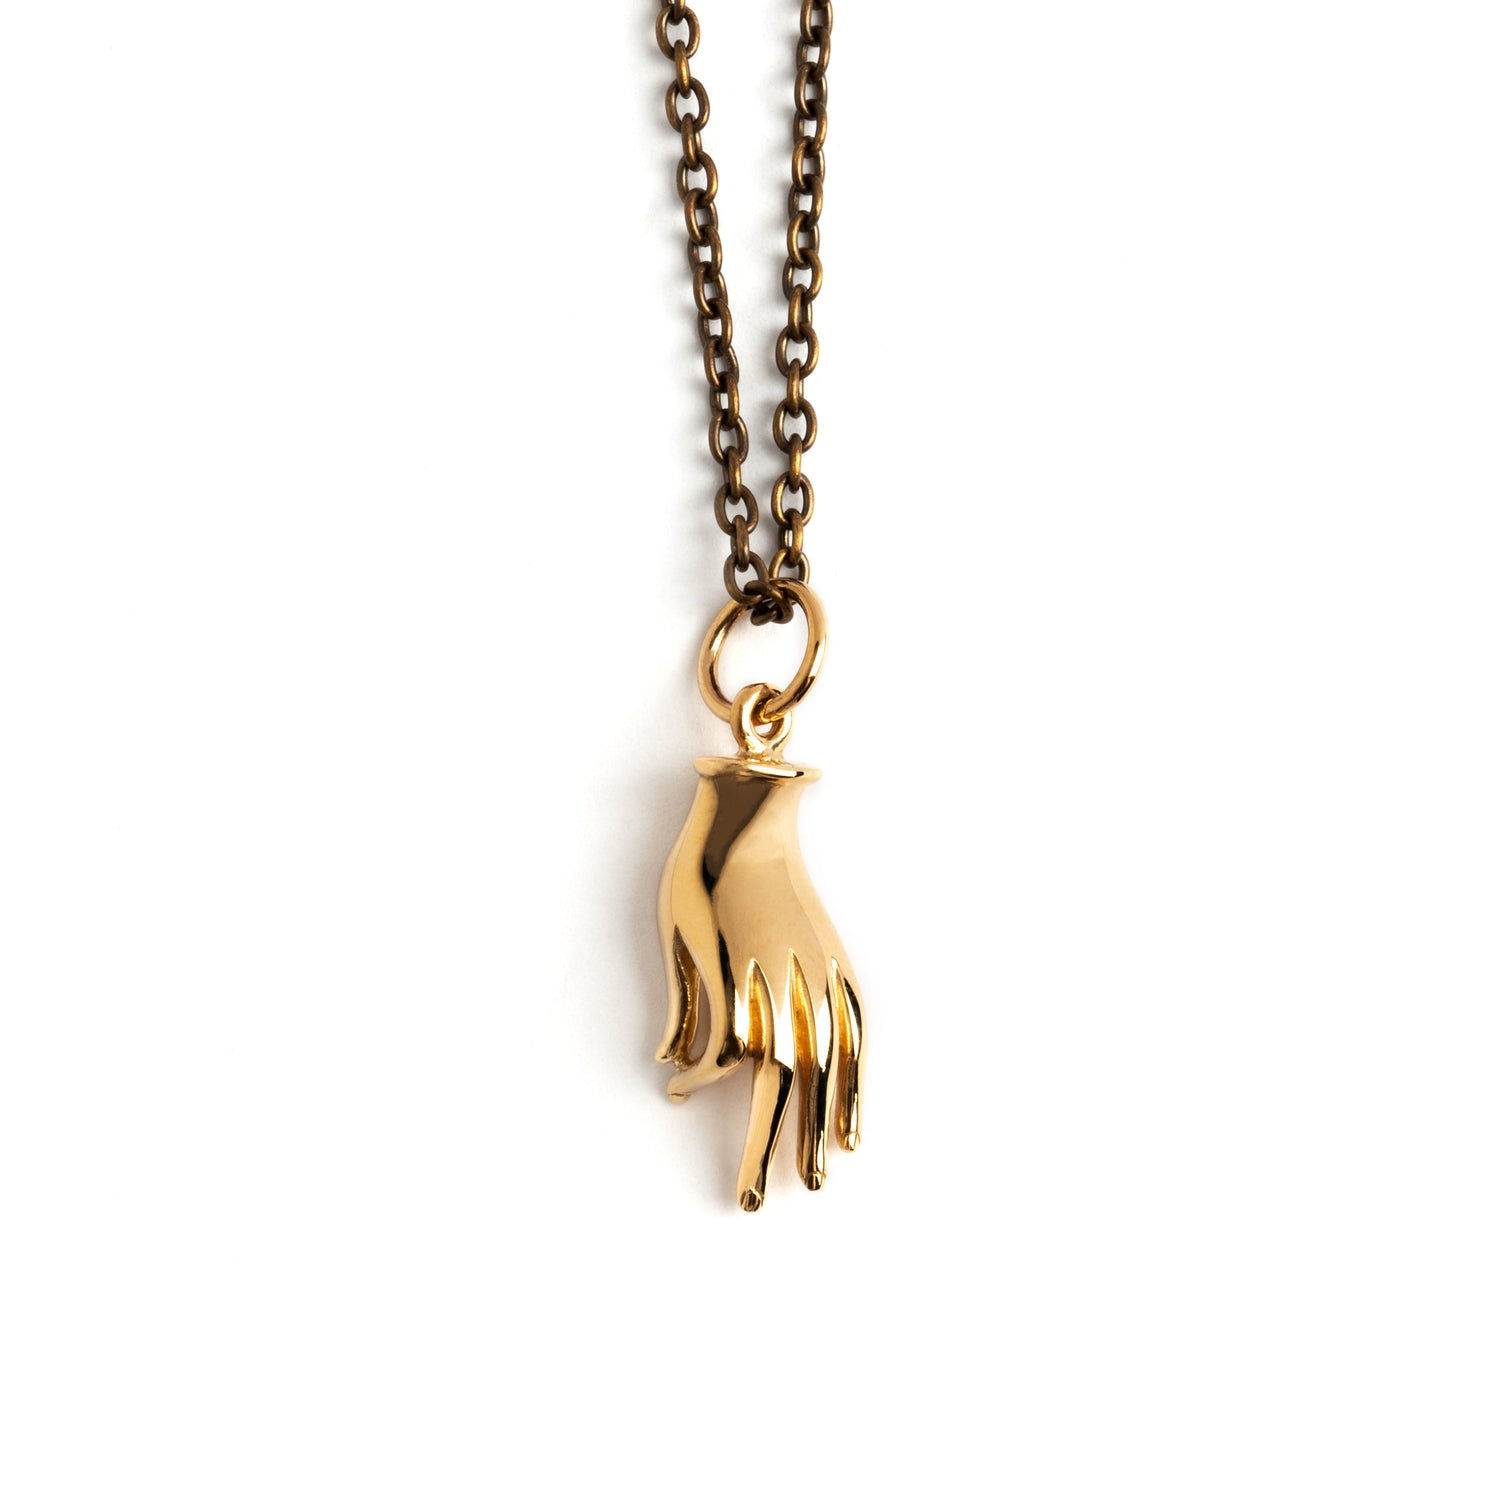 Bronze Mudra Charm necklace frontal view